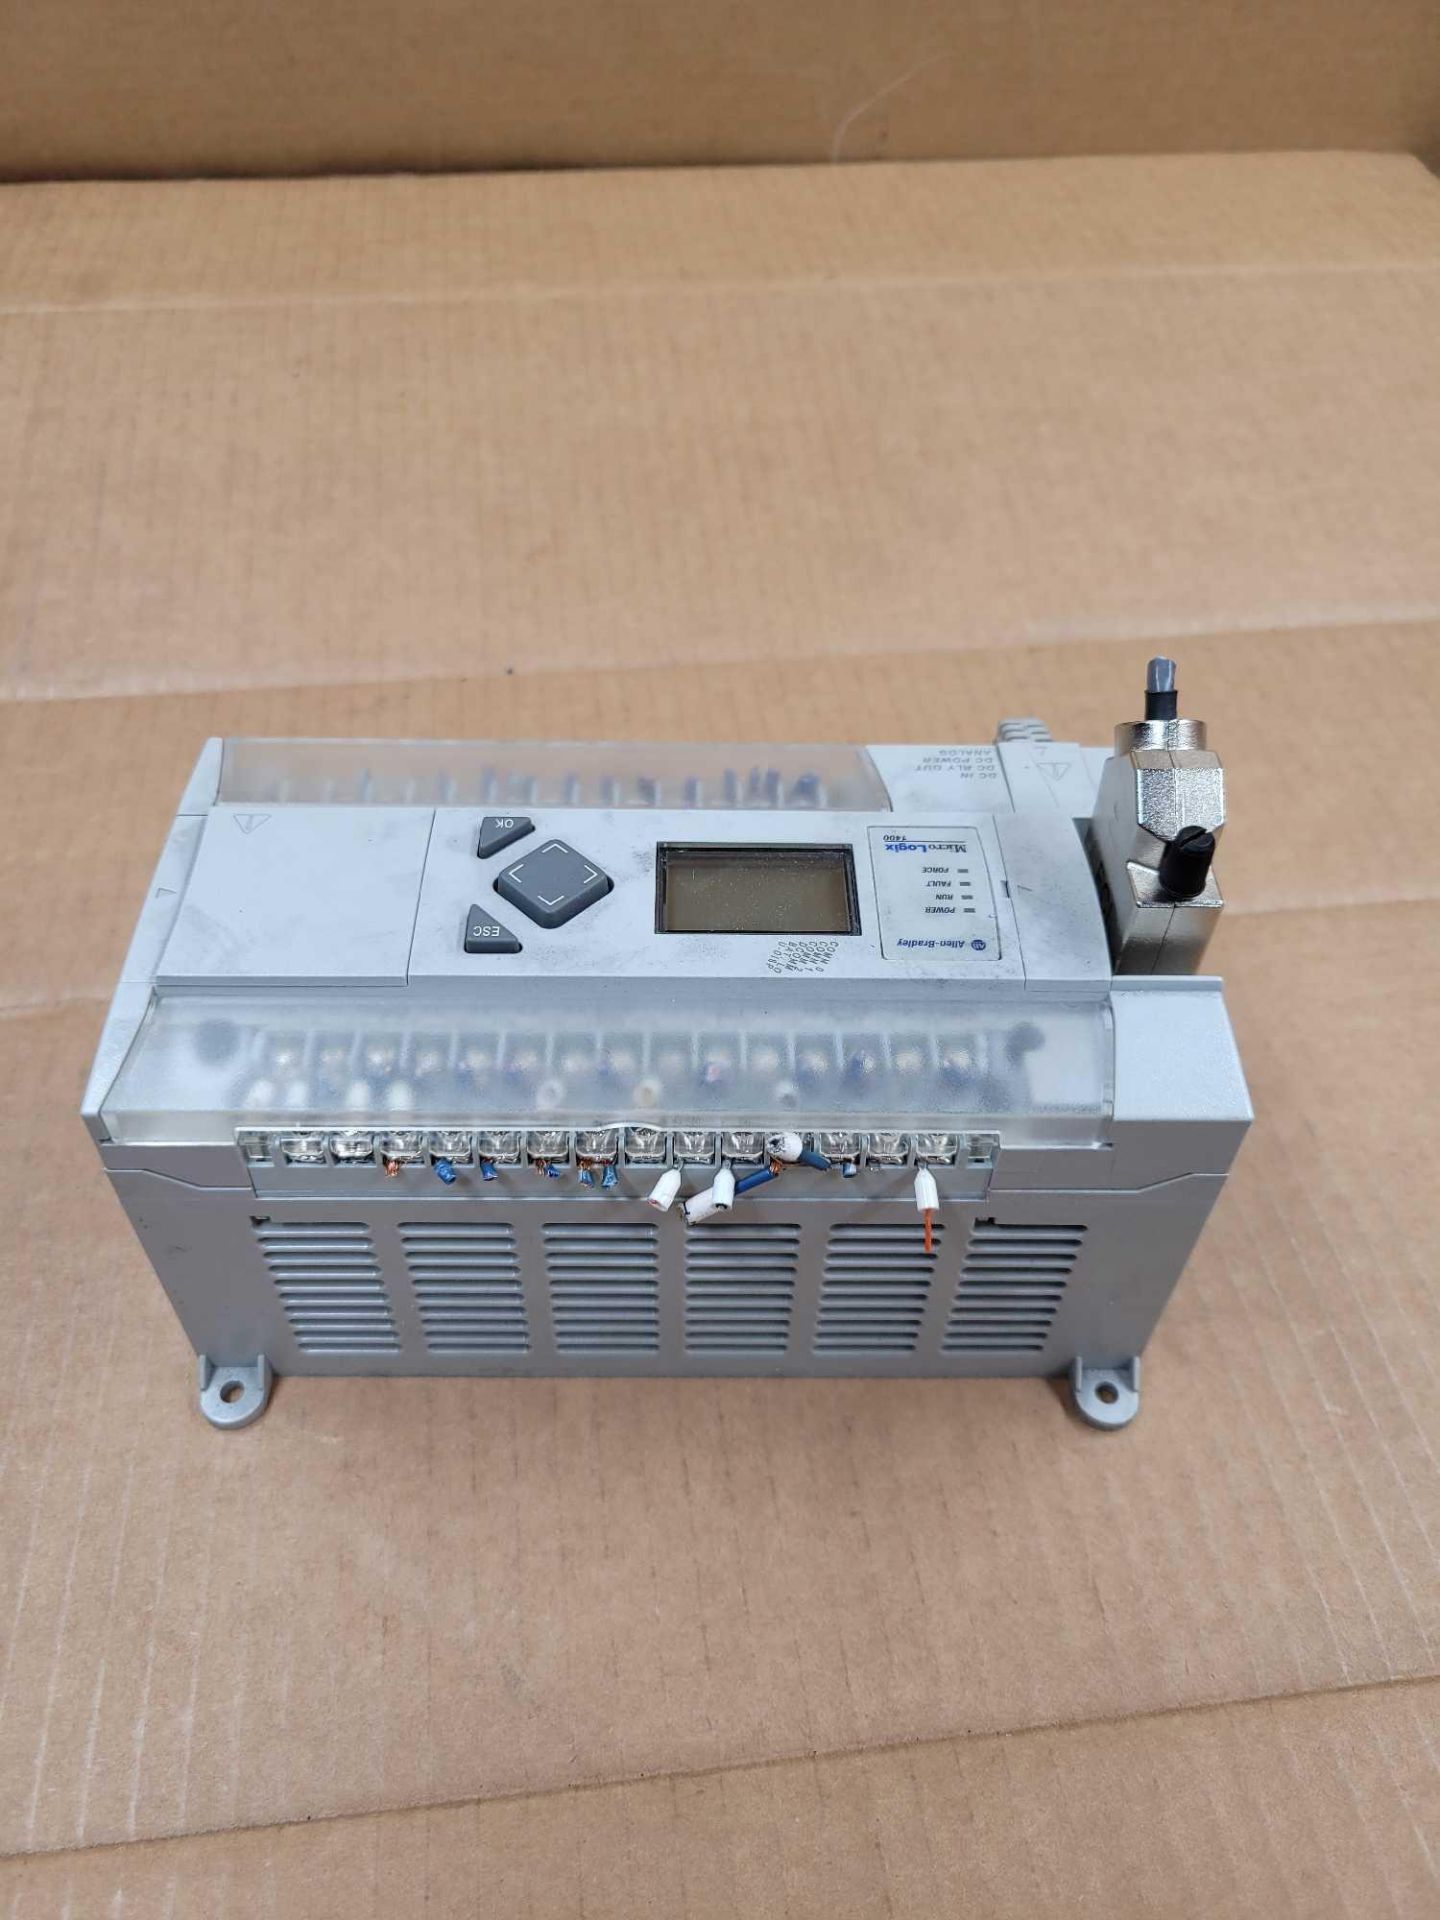 ALLEN BRADLEY 1766-L32BXBA / Series B MicroLogix 1400 32 Point Controller  /  Lot Weight: 2.0 lbs - Image 3 of 7